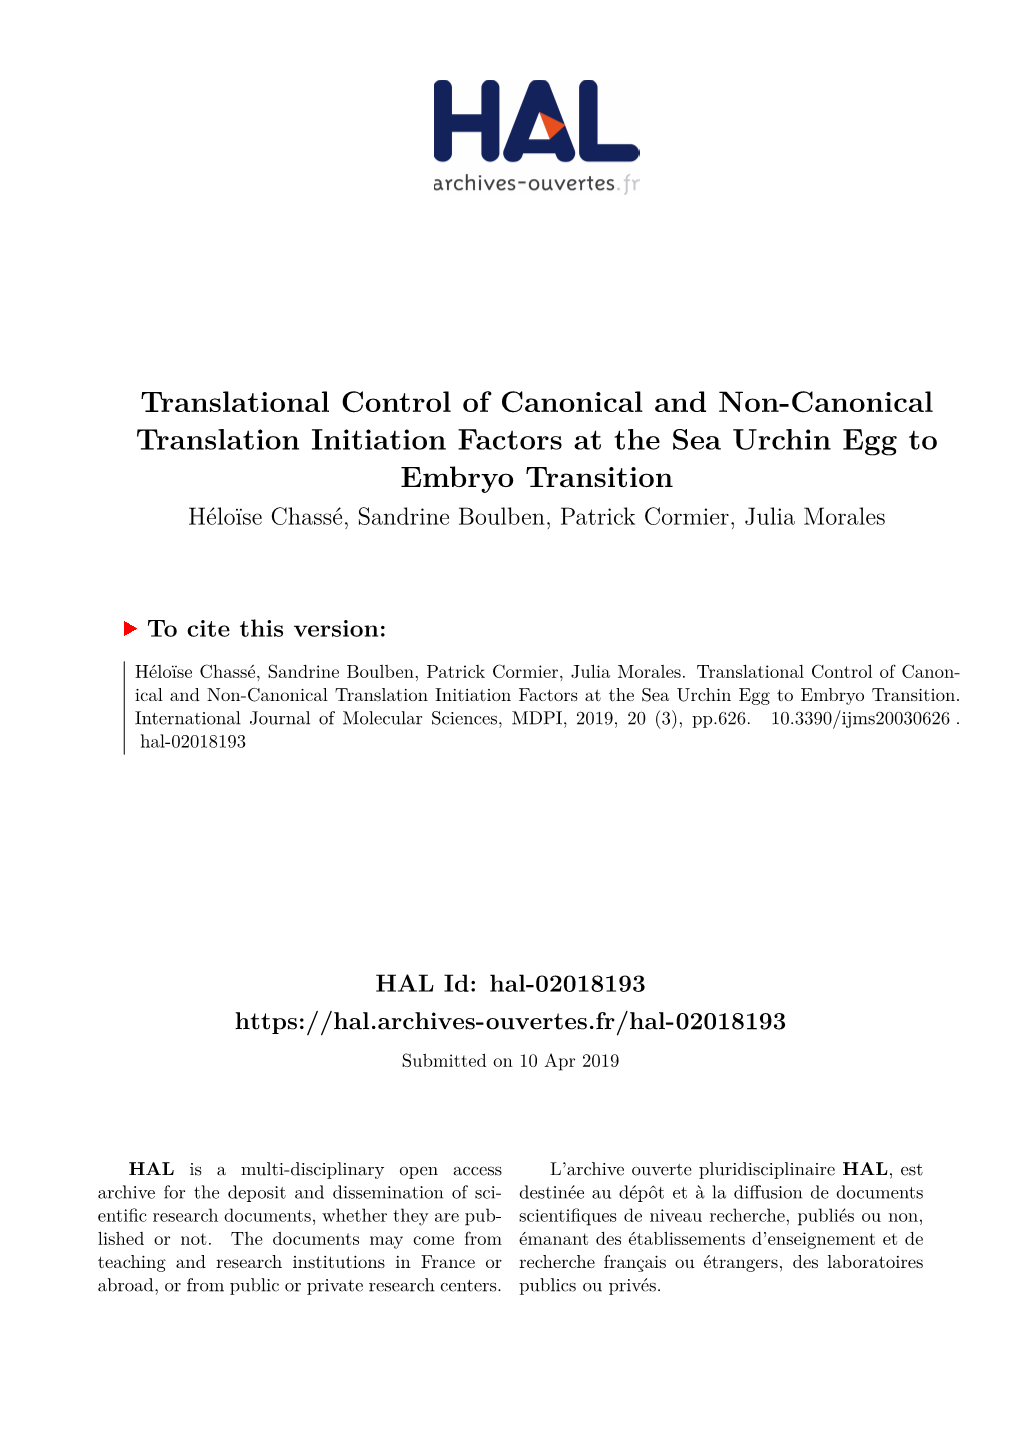 Translational Control of Canonical and Non-Canonical Translation